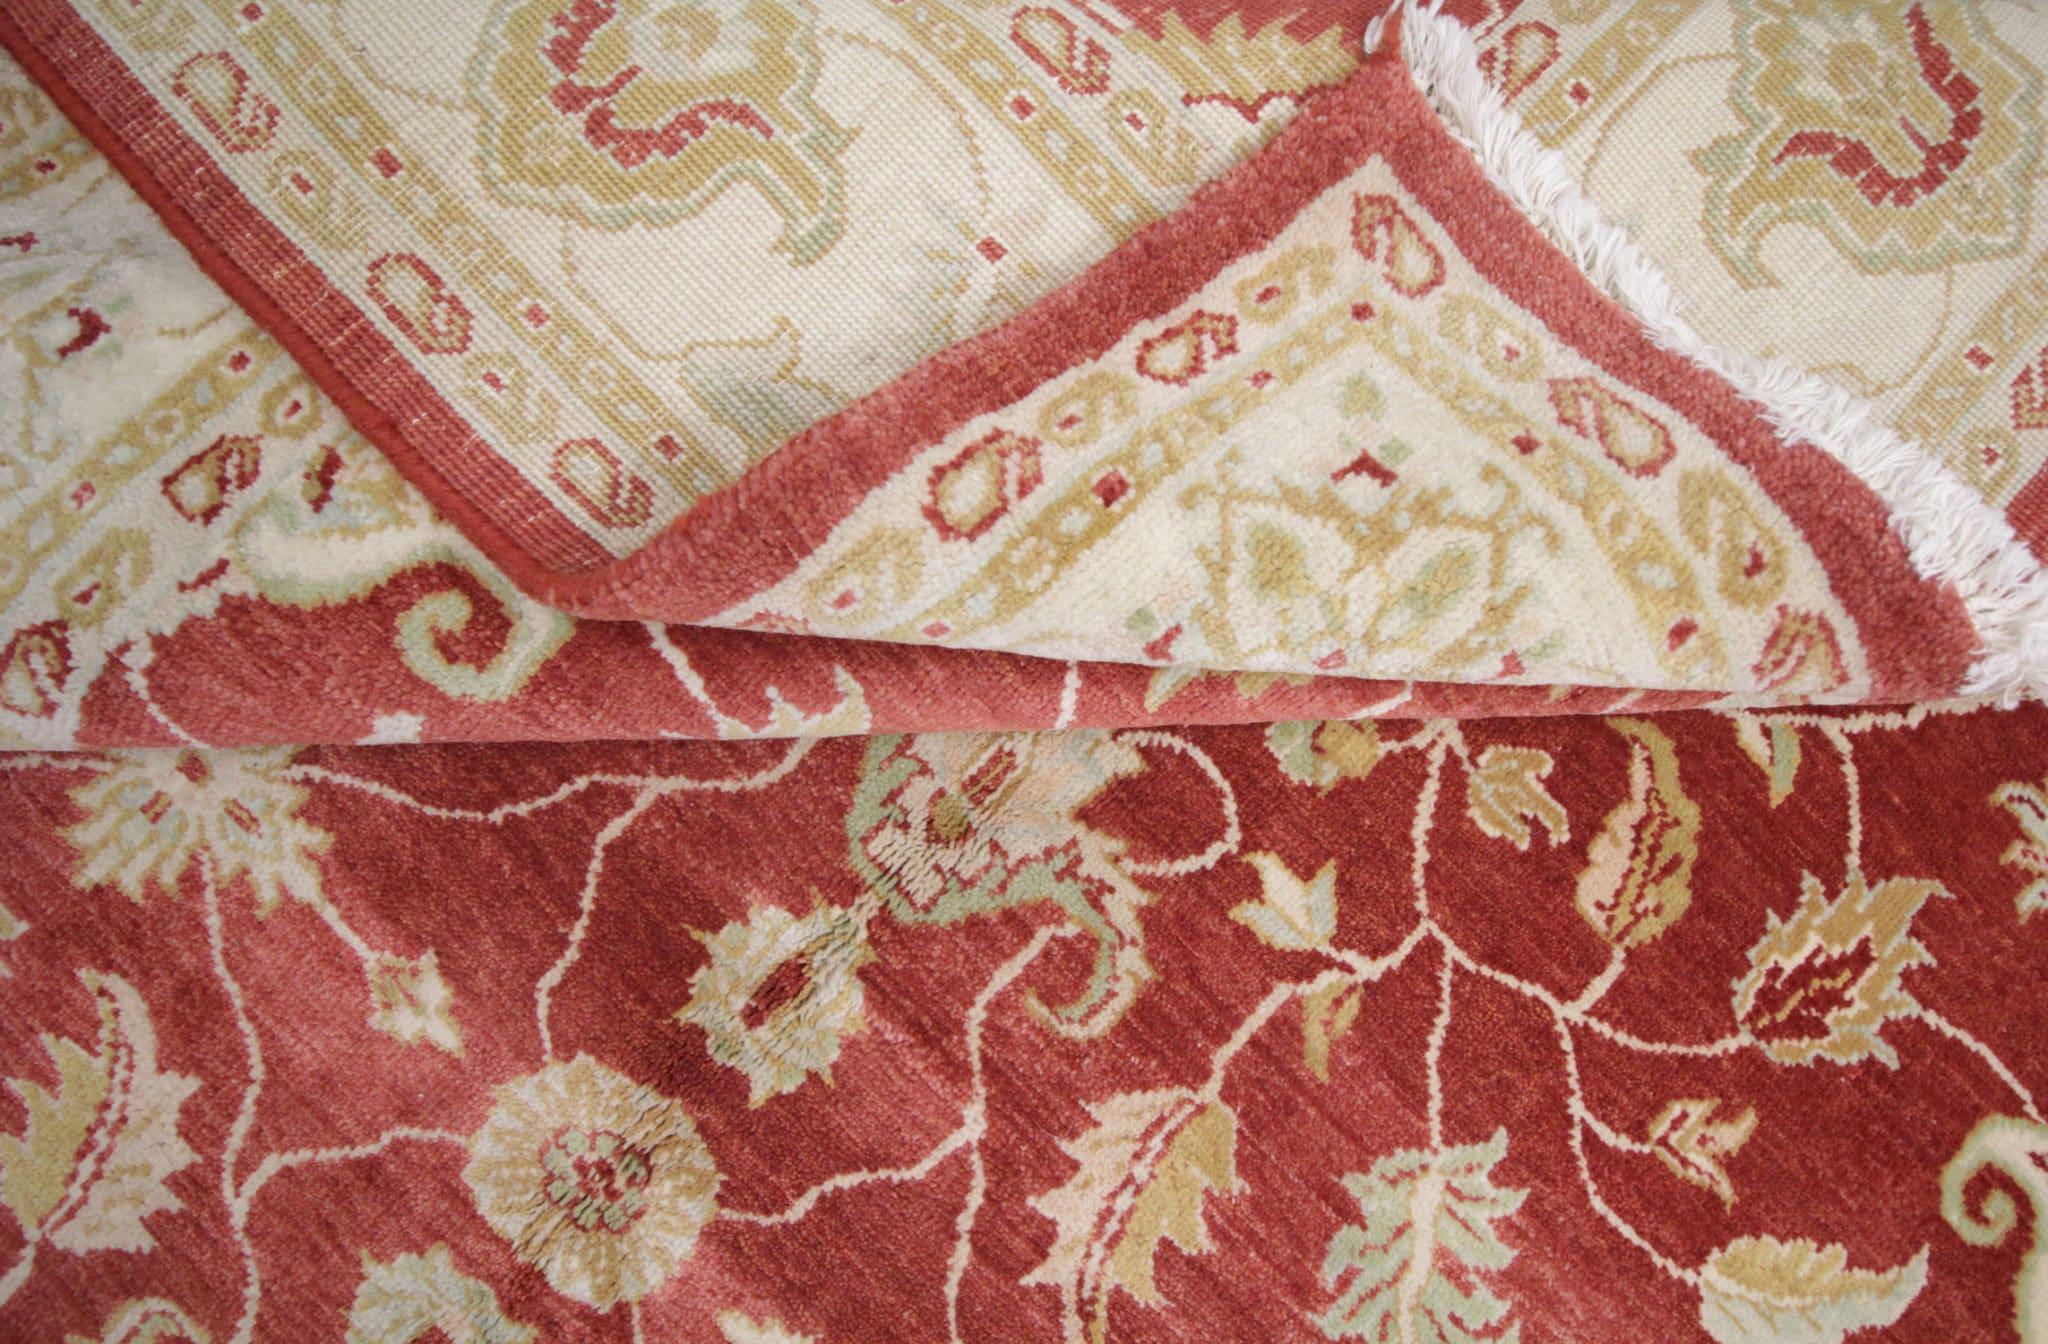 Cotton Oriental Rugs, Red Living Room Rugs, Handmade Carpet Floral Ziegler Rugs For Sale